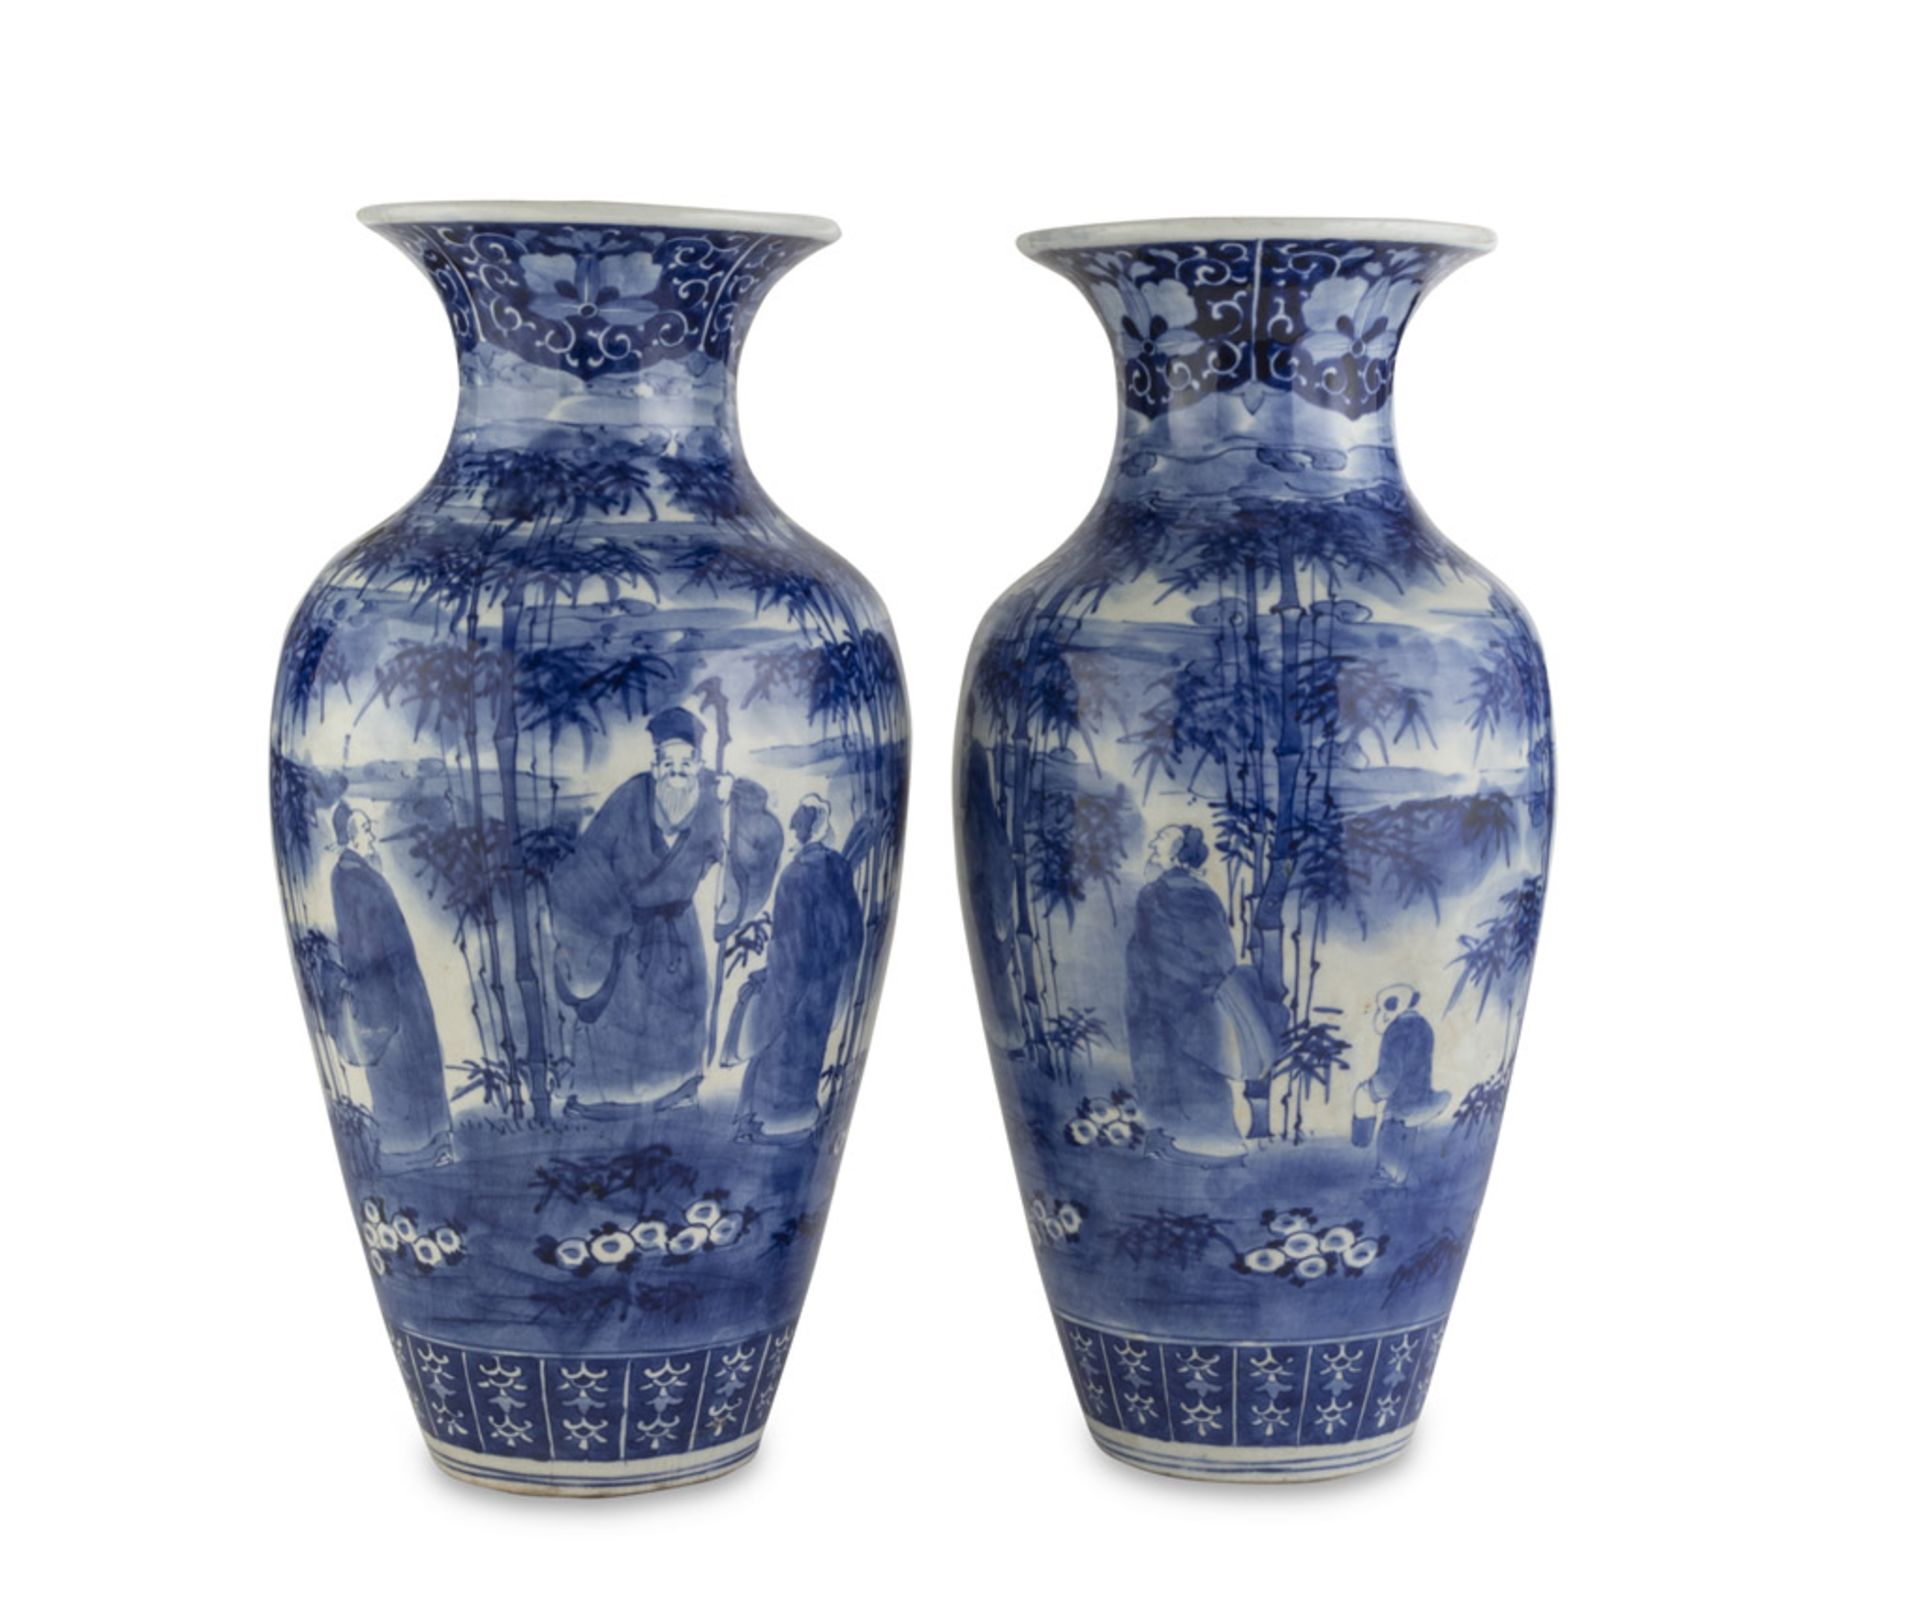 A PAIR OF WHITE AND BLUE PORCELAIN VASES, JAPAN LATE 19TH, EARLY 20TH CENTURY decorated with a